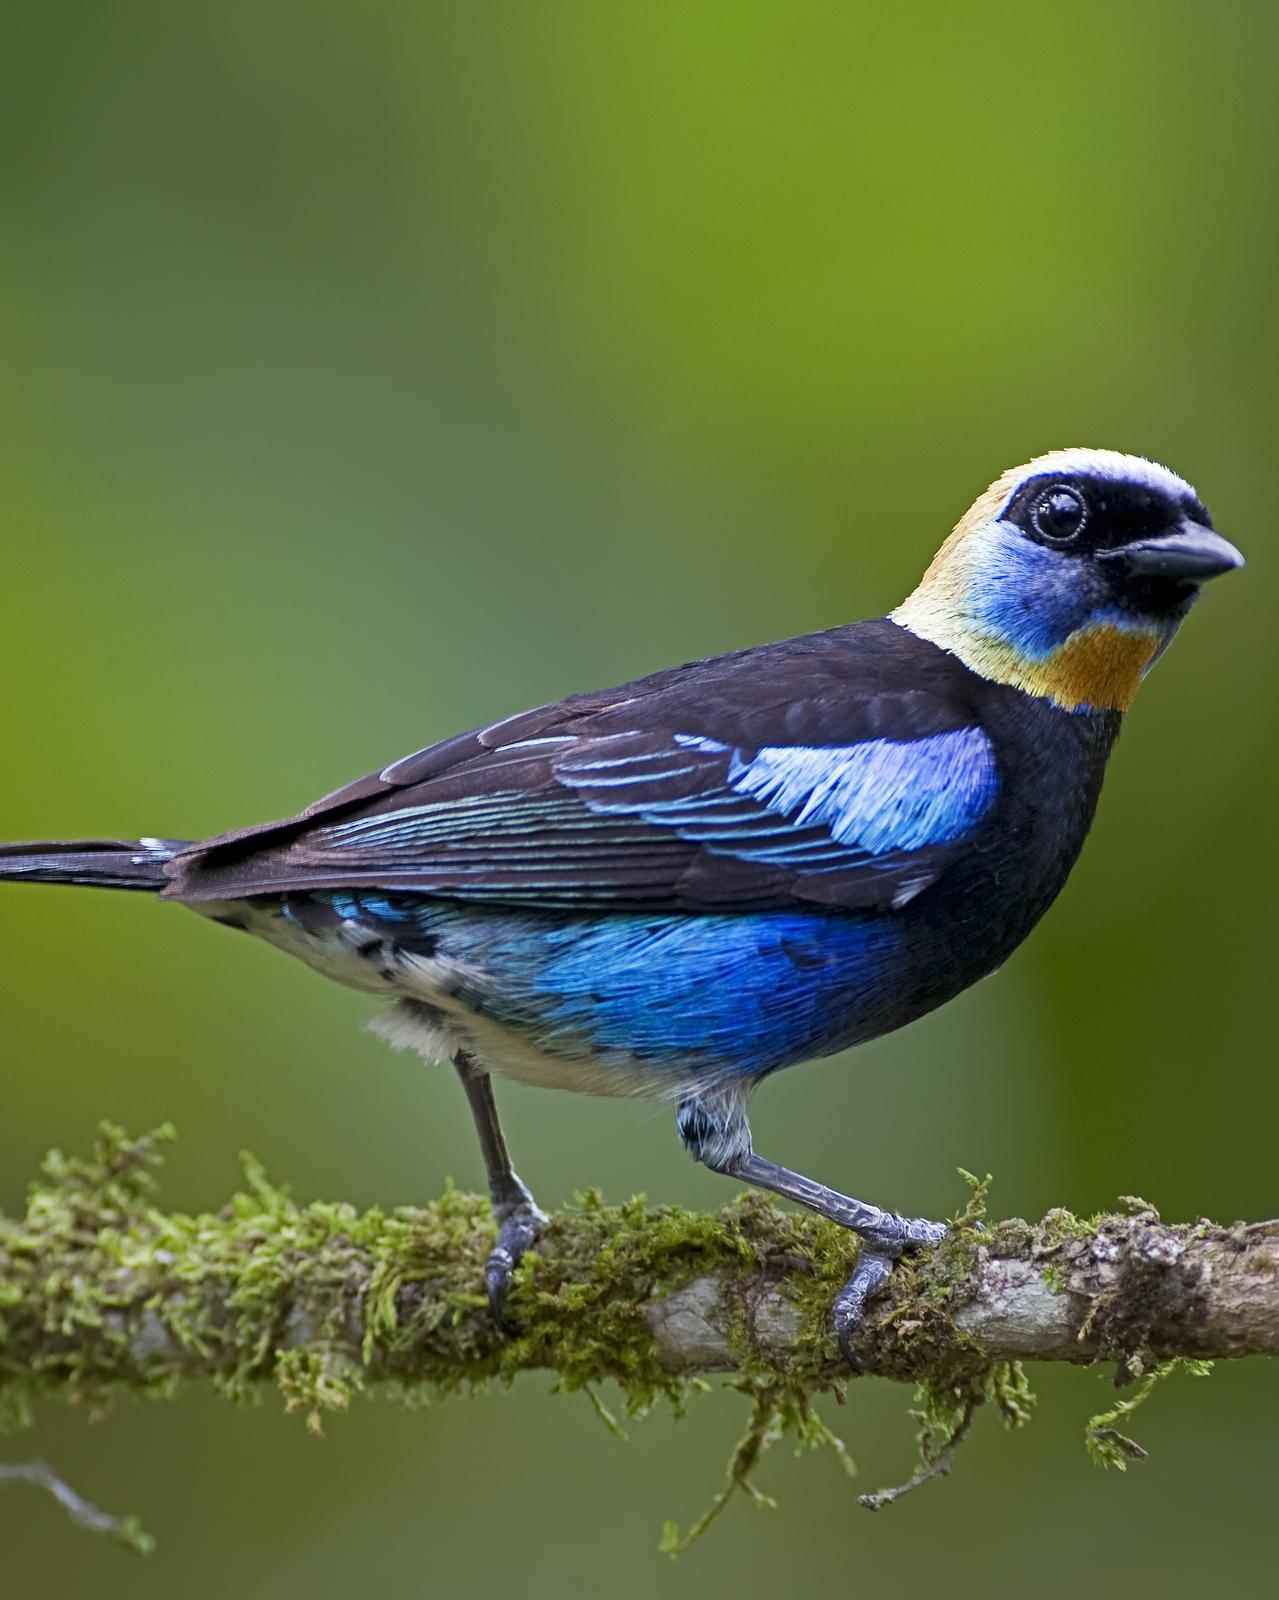 Golden-hooded Tanager Photo by Alex Vargas